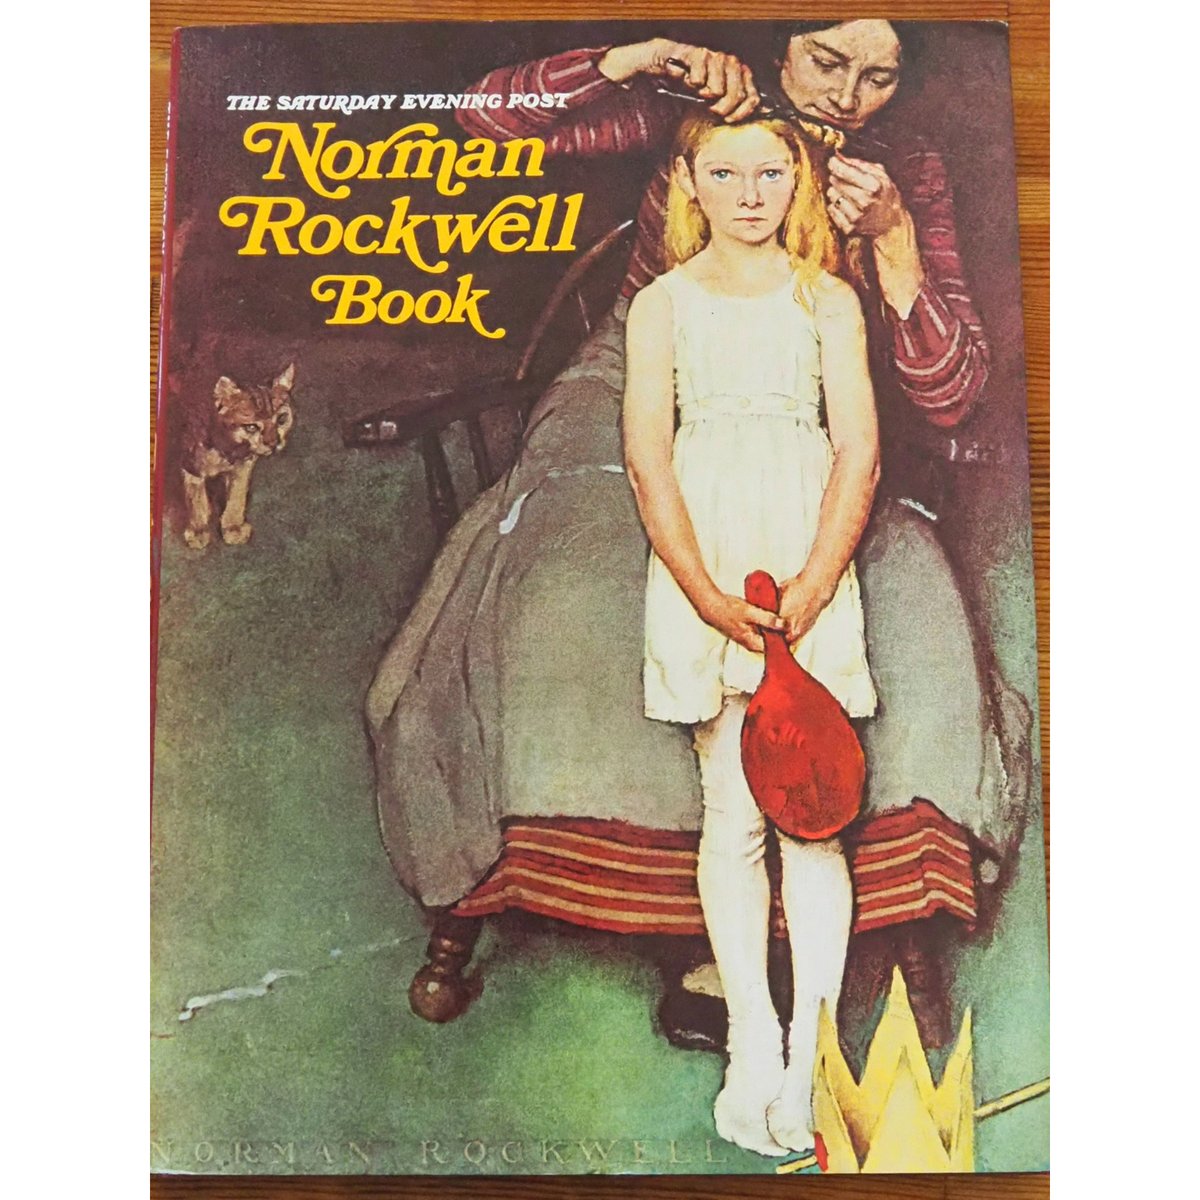 Norman Rock well book 洋書 ノーマンロックウェル - 洋書